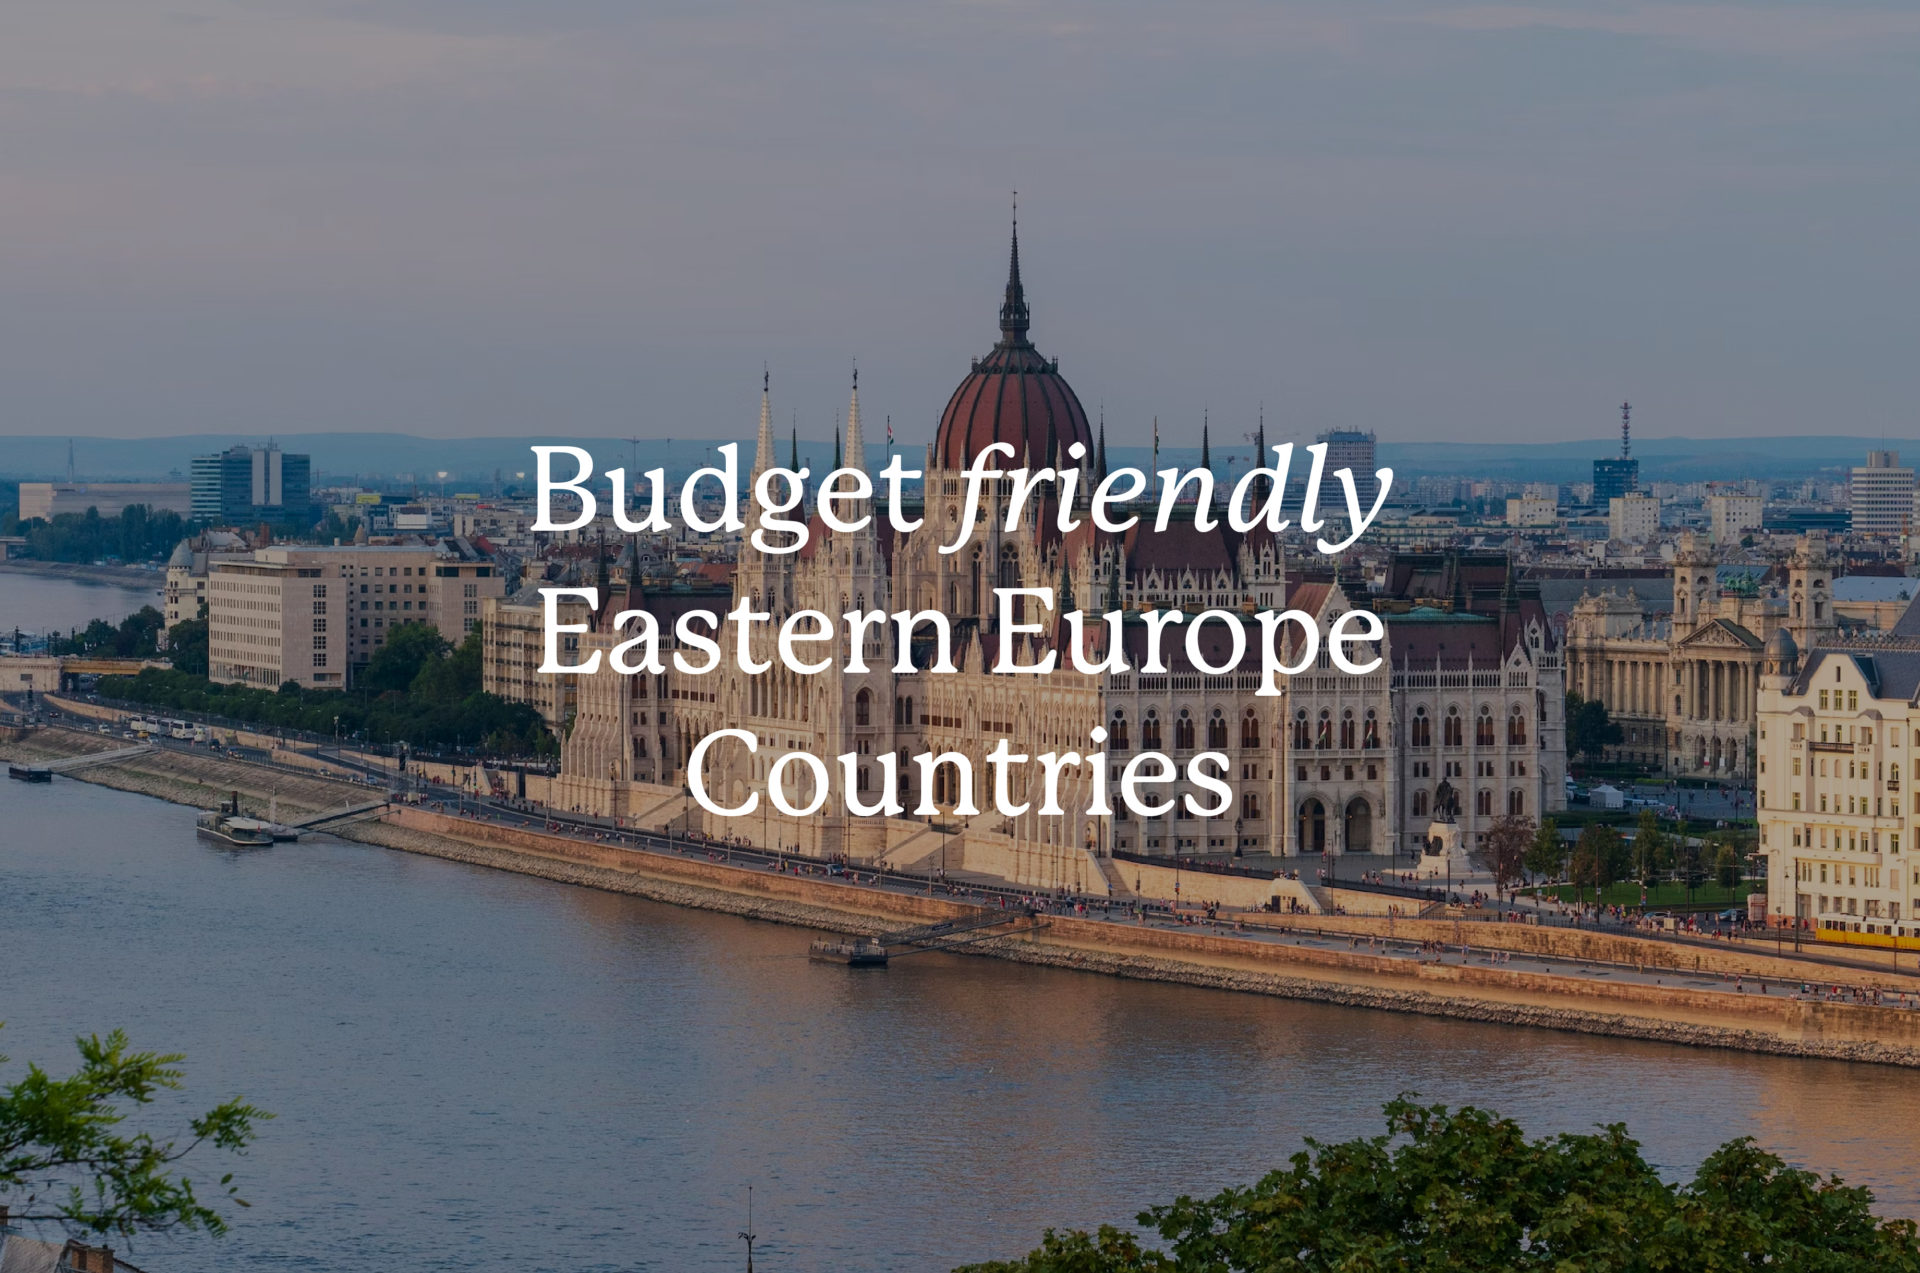 budget-friendly Eastern Europe countries